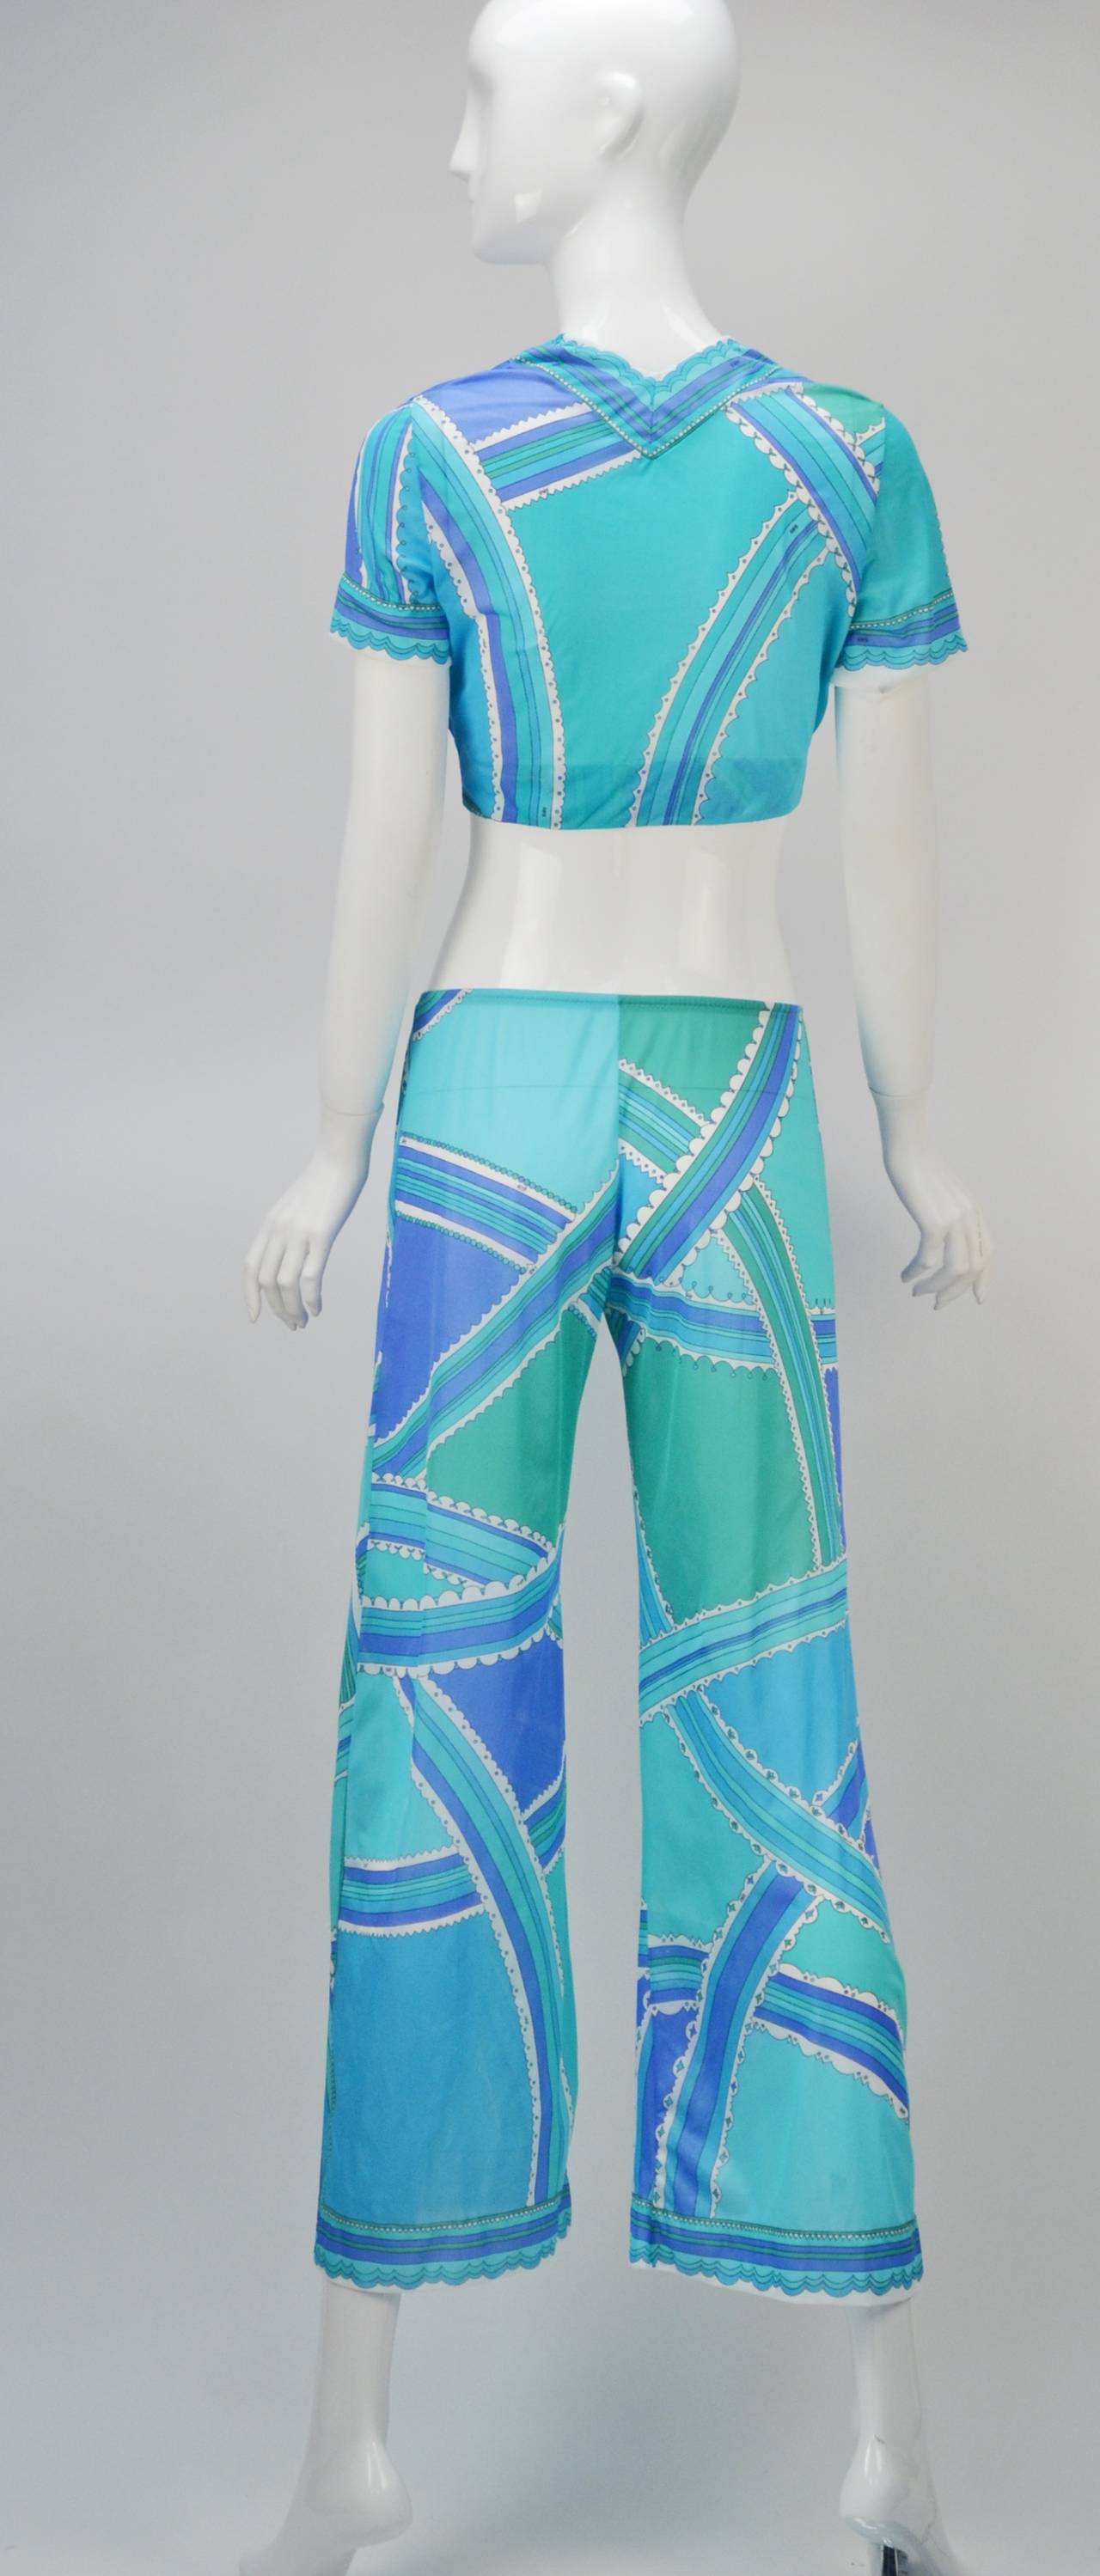 Beautiful and vibrant Emilio Pucci for Formfit Rodgers nylon top and pants two-piece lounge set. The short-sleeve top can be worn loose or tied in a crop format. The pants have an elastic waistband and flared leg. The "Pucci" logo can be